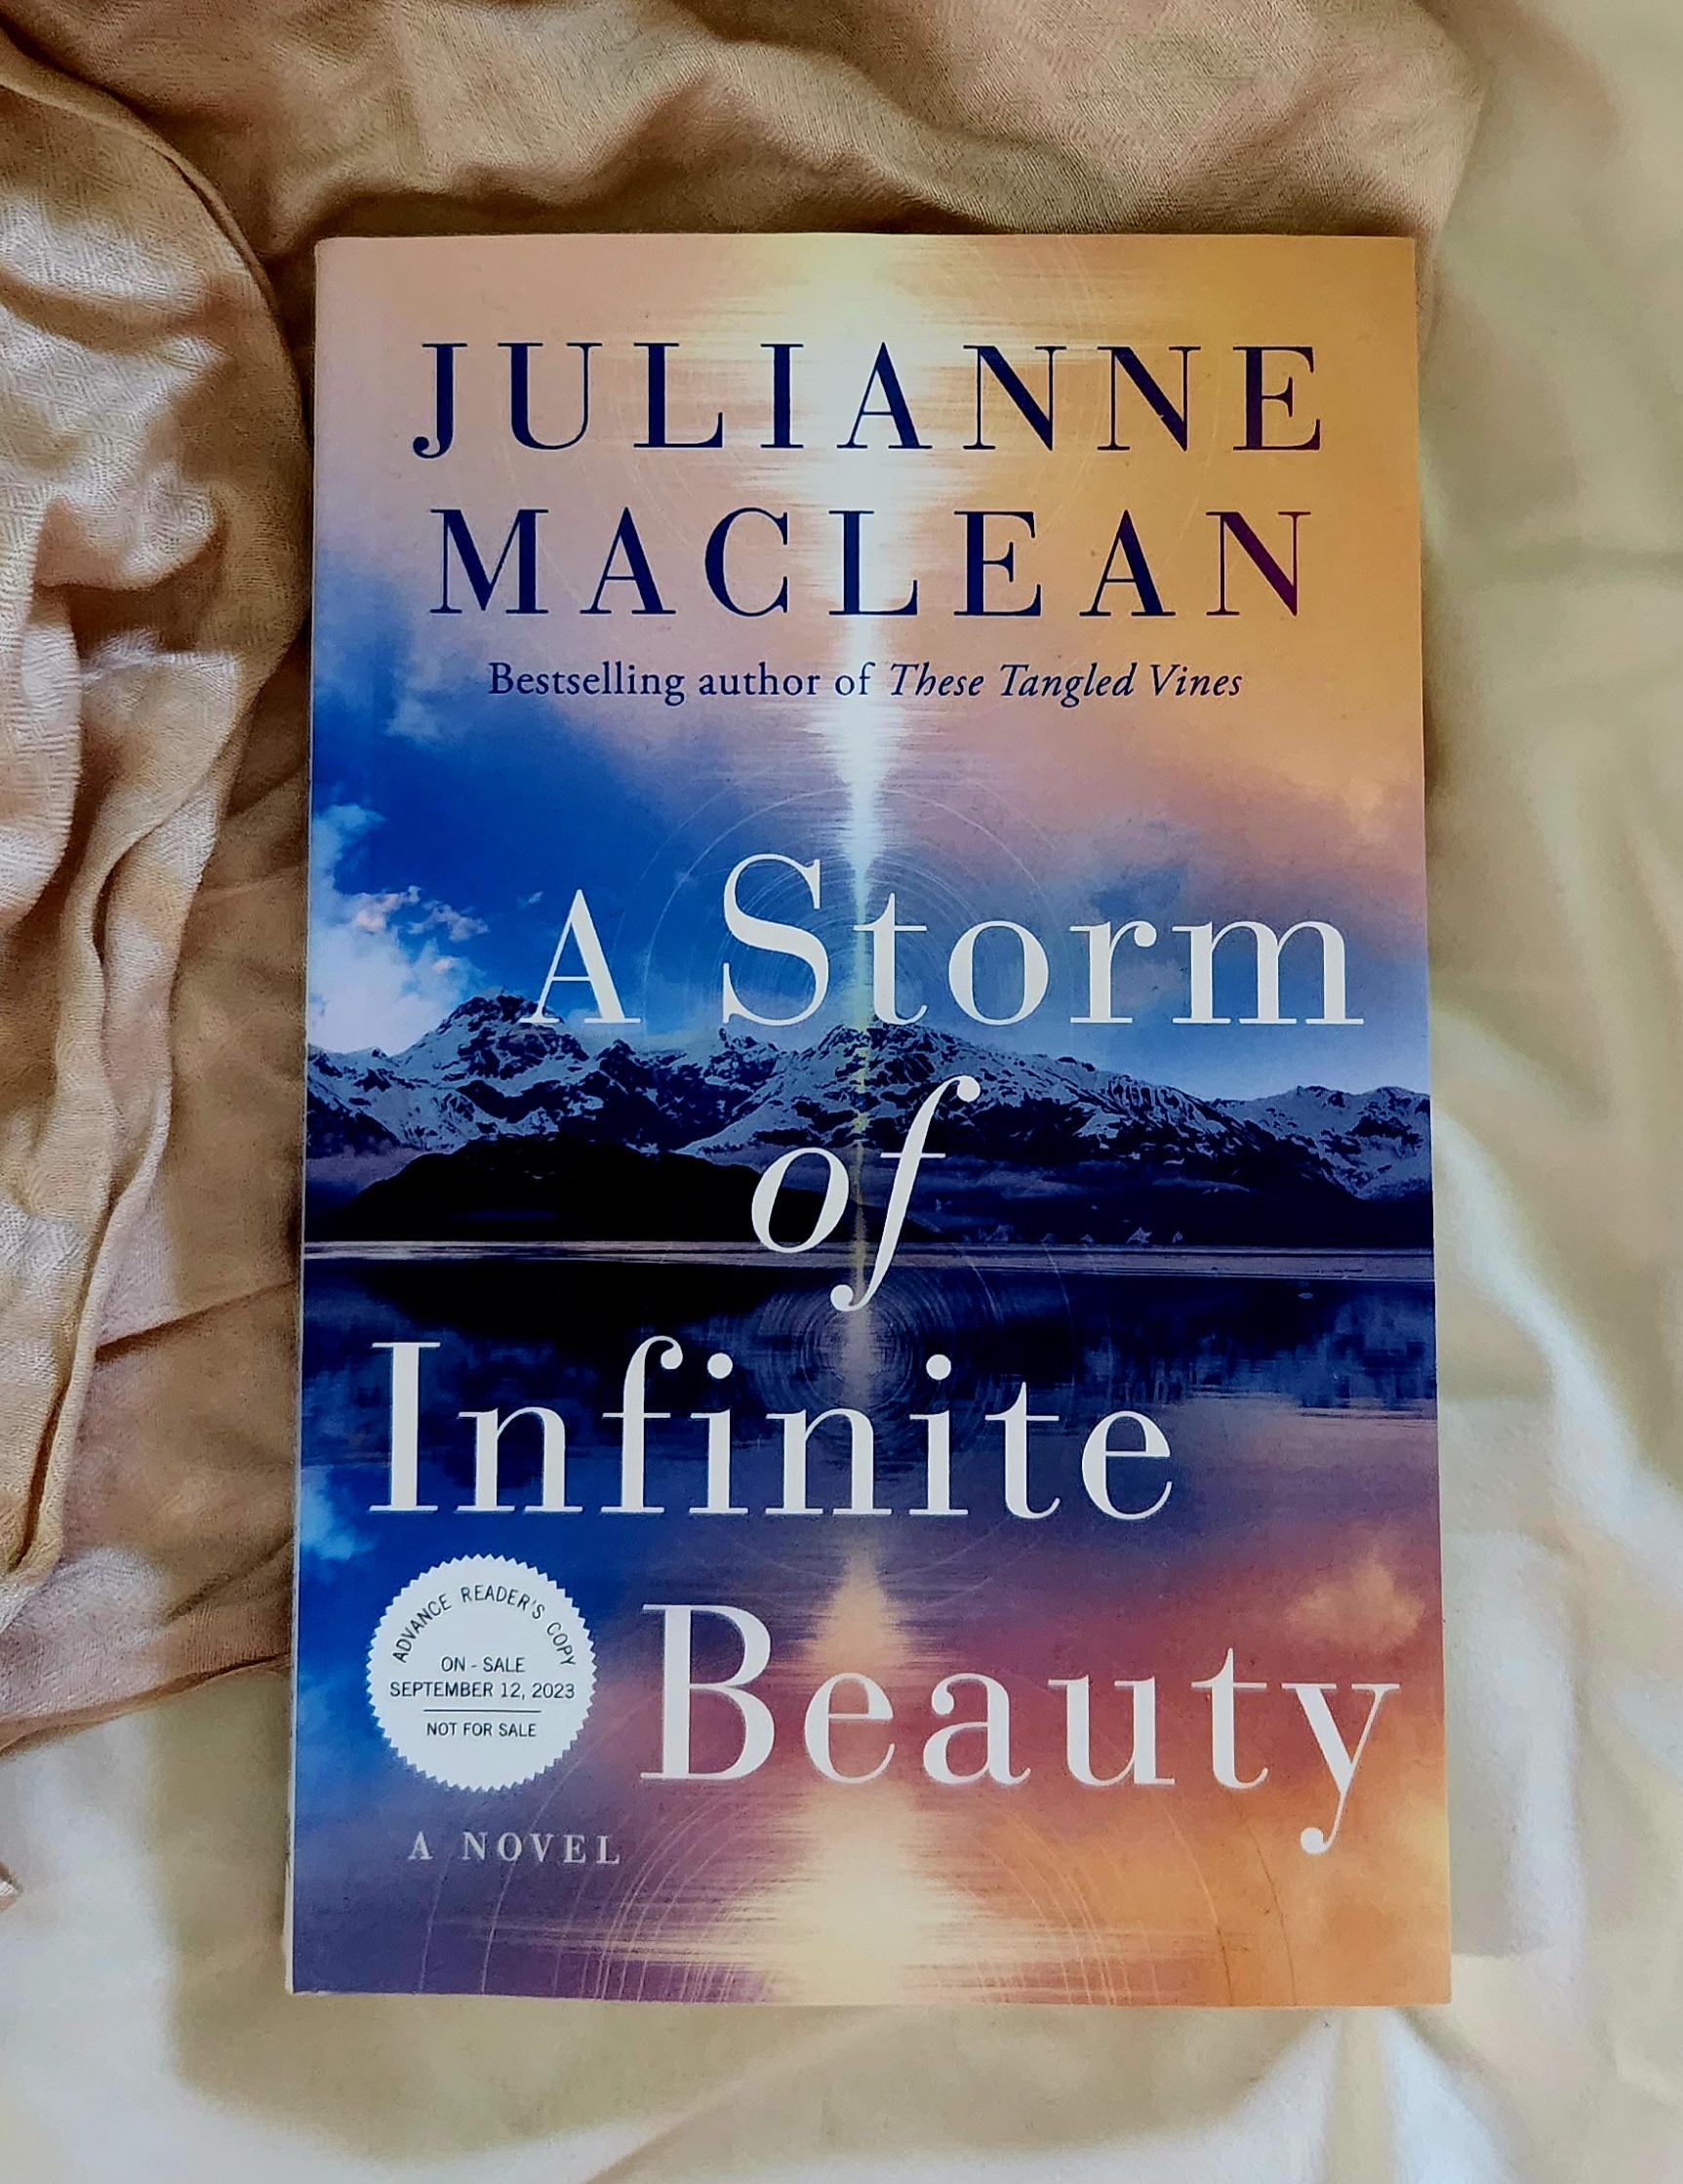 Book Review of A STORM OF INFINITE BEAUTY